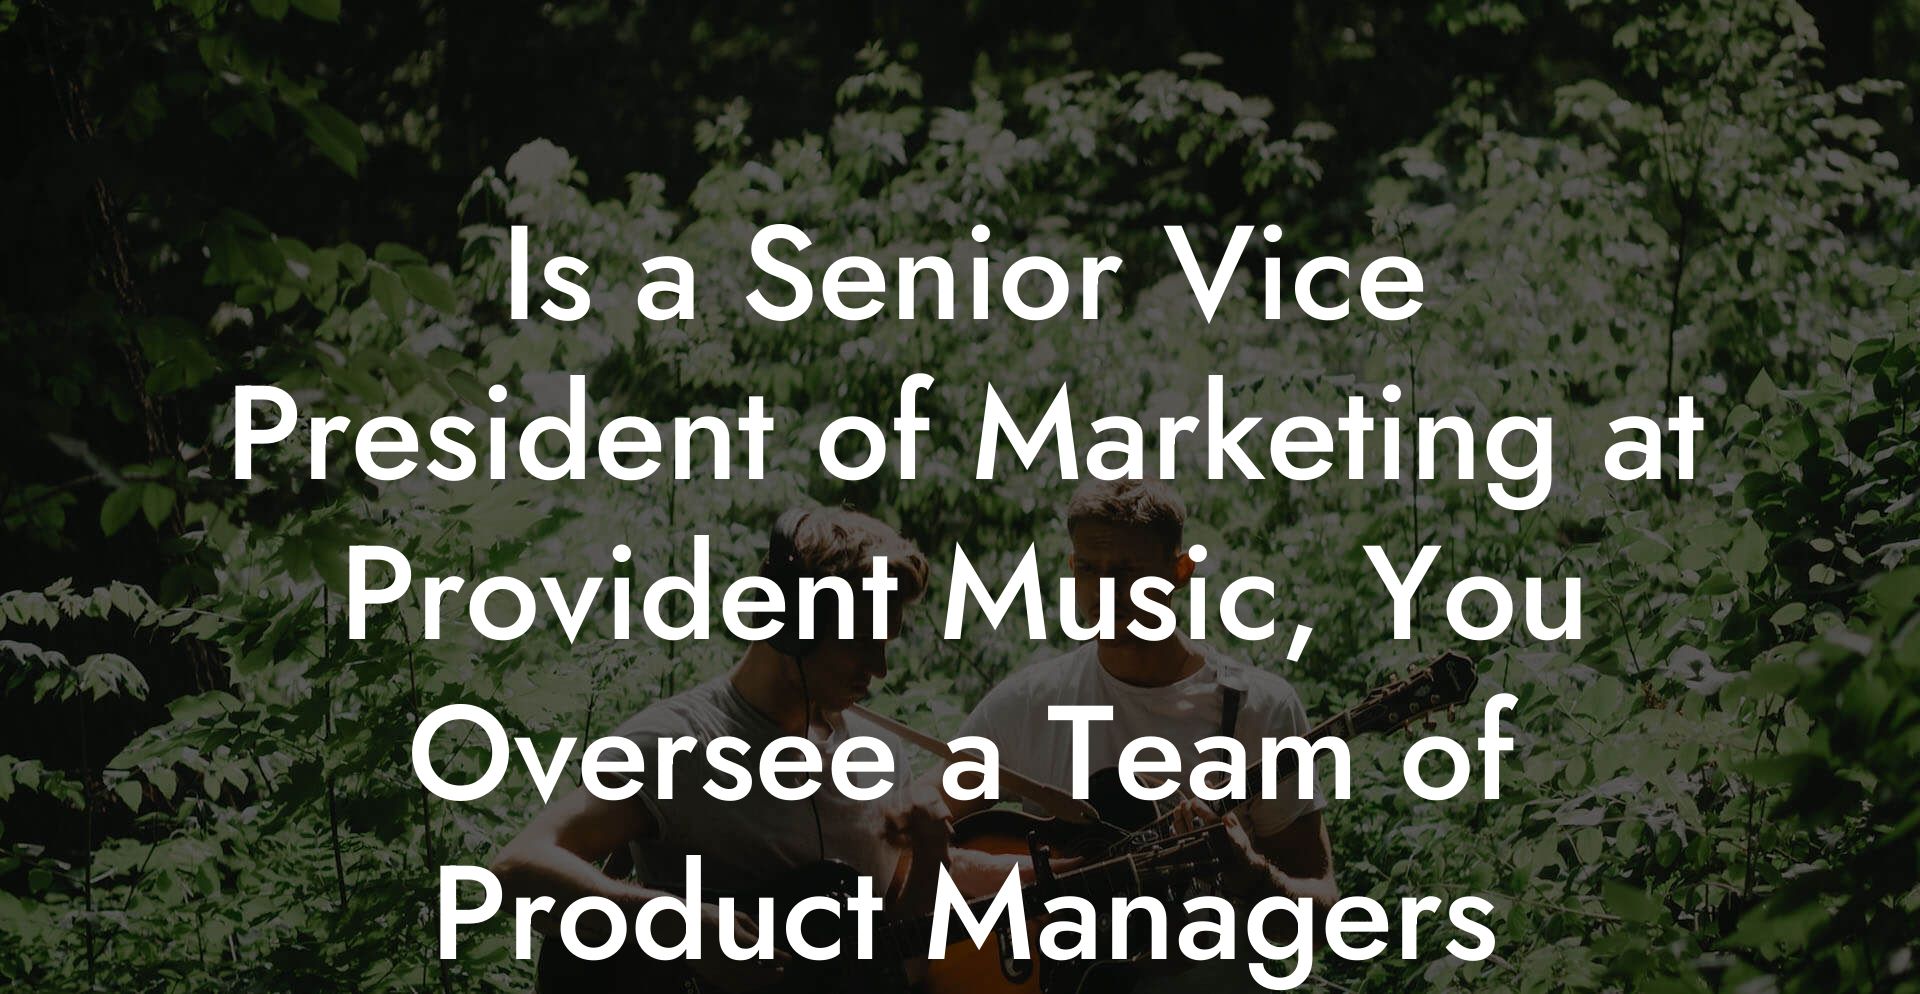 Is a Senior Vice President of Marketing at Provident Music, You Oversee a Team of Product Managers